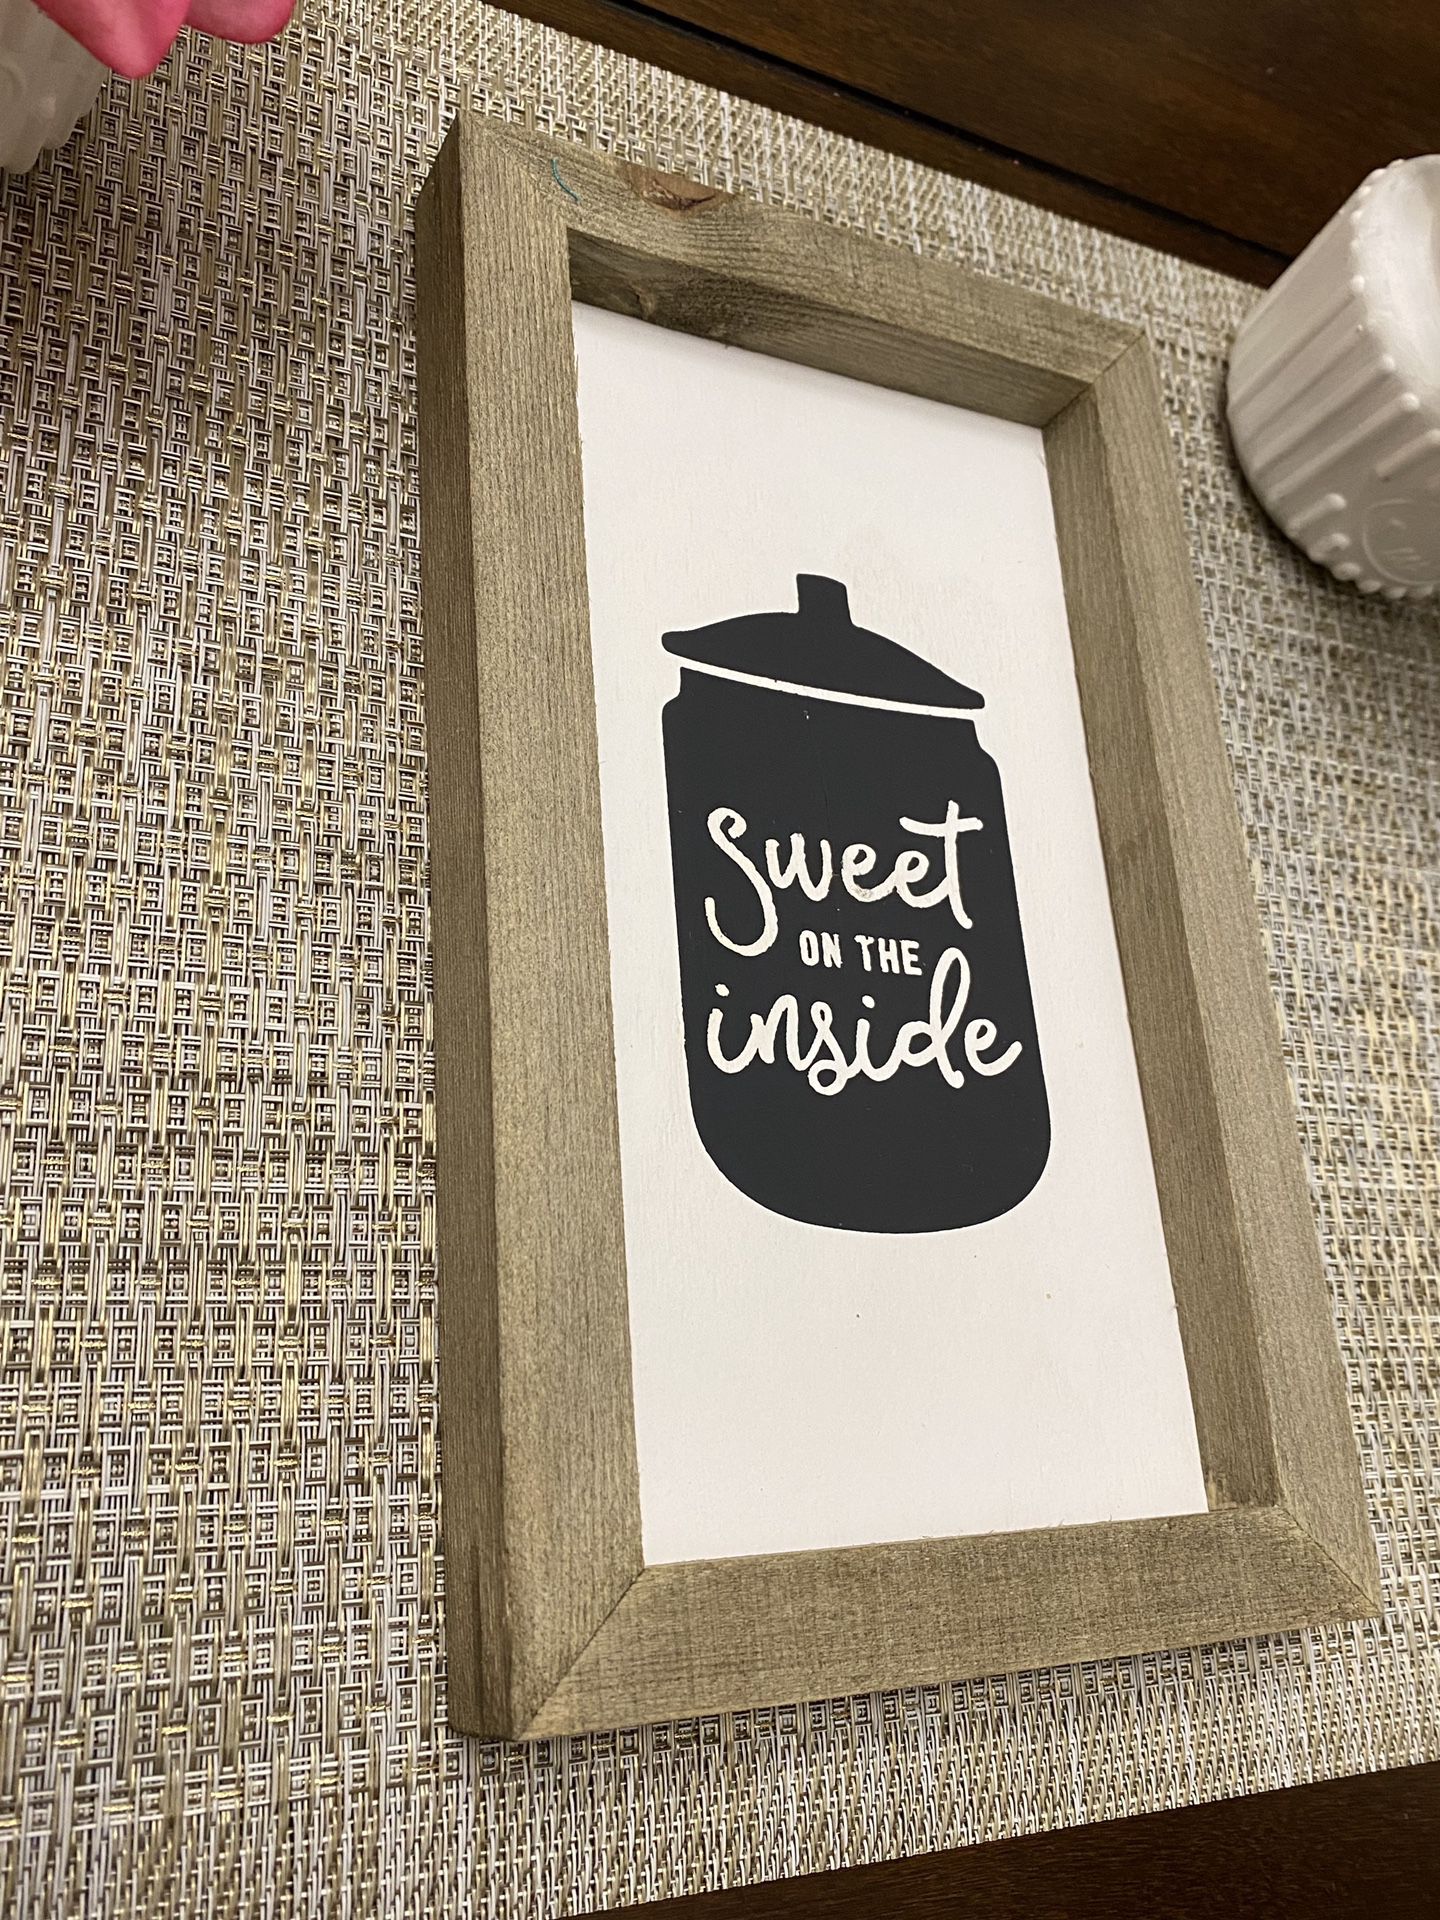 Farmhouse, Rustic kitchen decor, wood sign, sweet on the inside